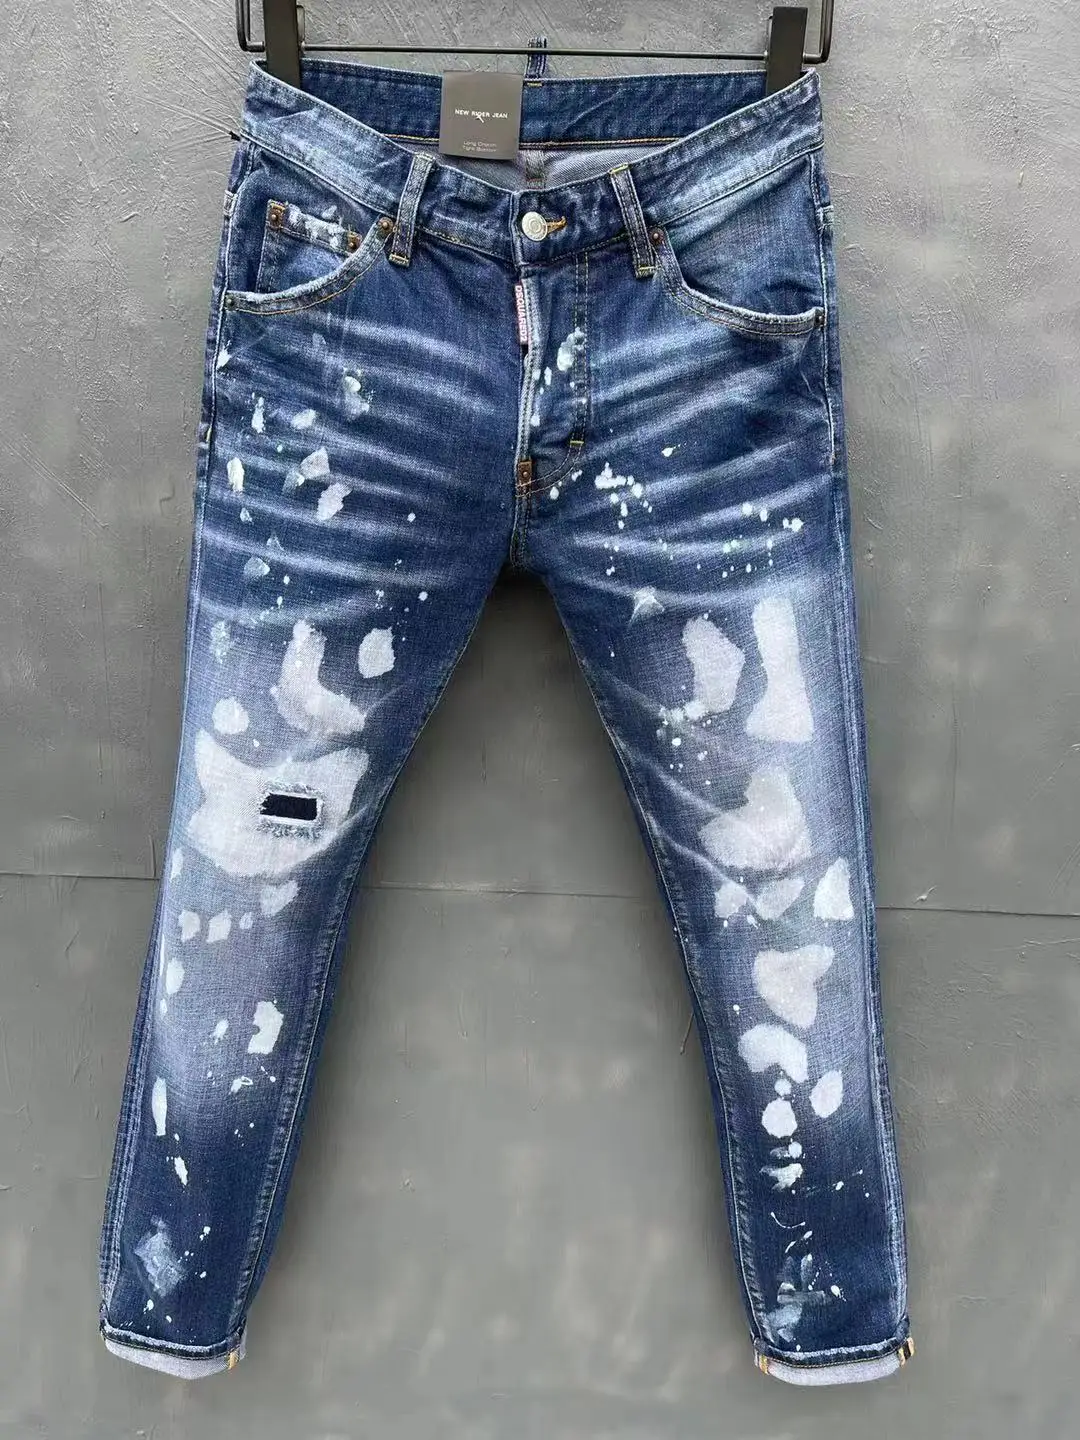 

2021 New DSQUARED2 Men's/Women's Jeans Fashion Slim-Fitting Washed Stretch Hole Paint Spotted Pants 131-1